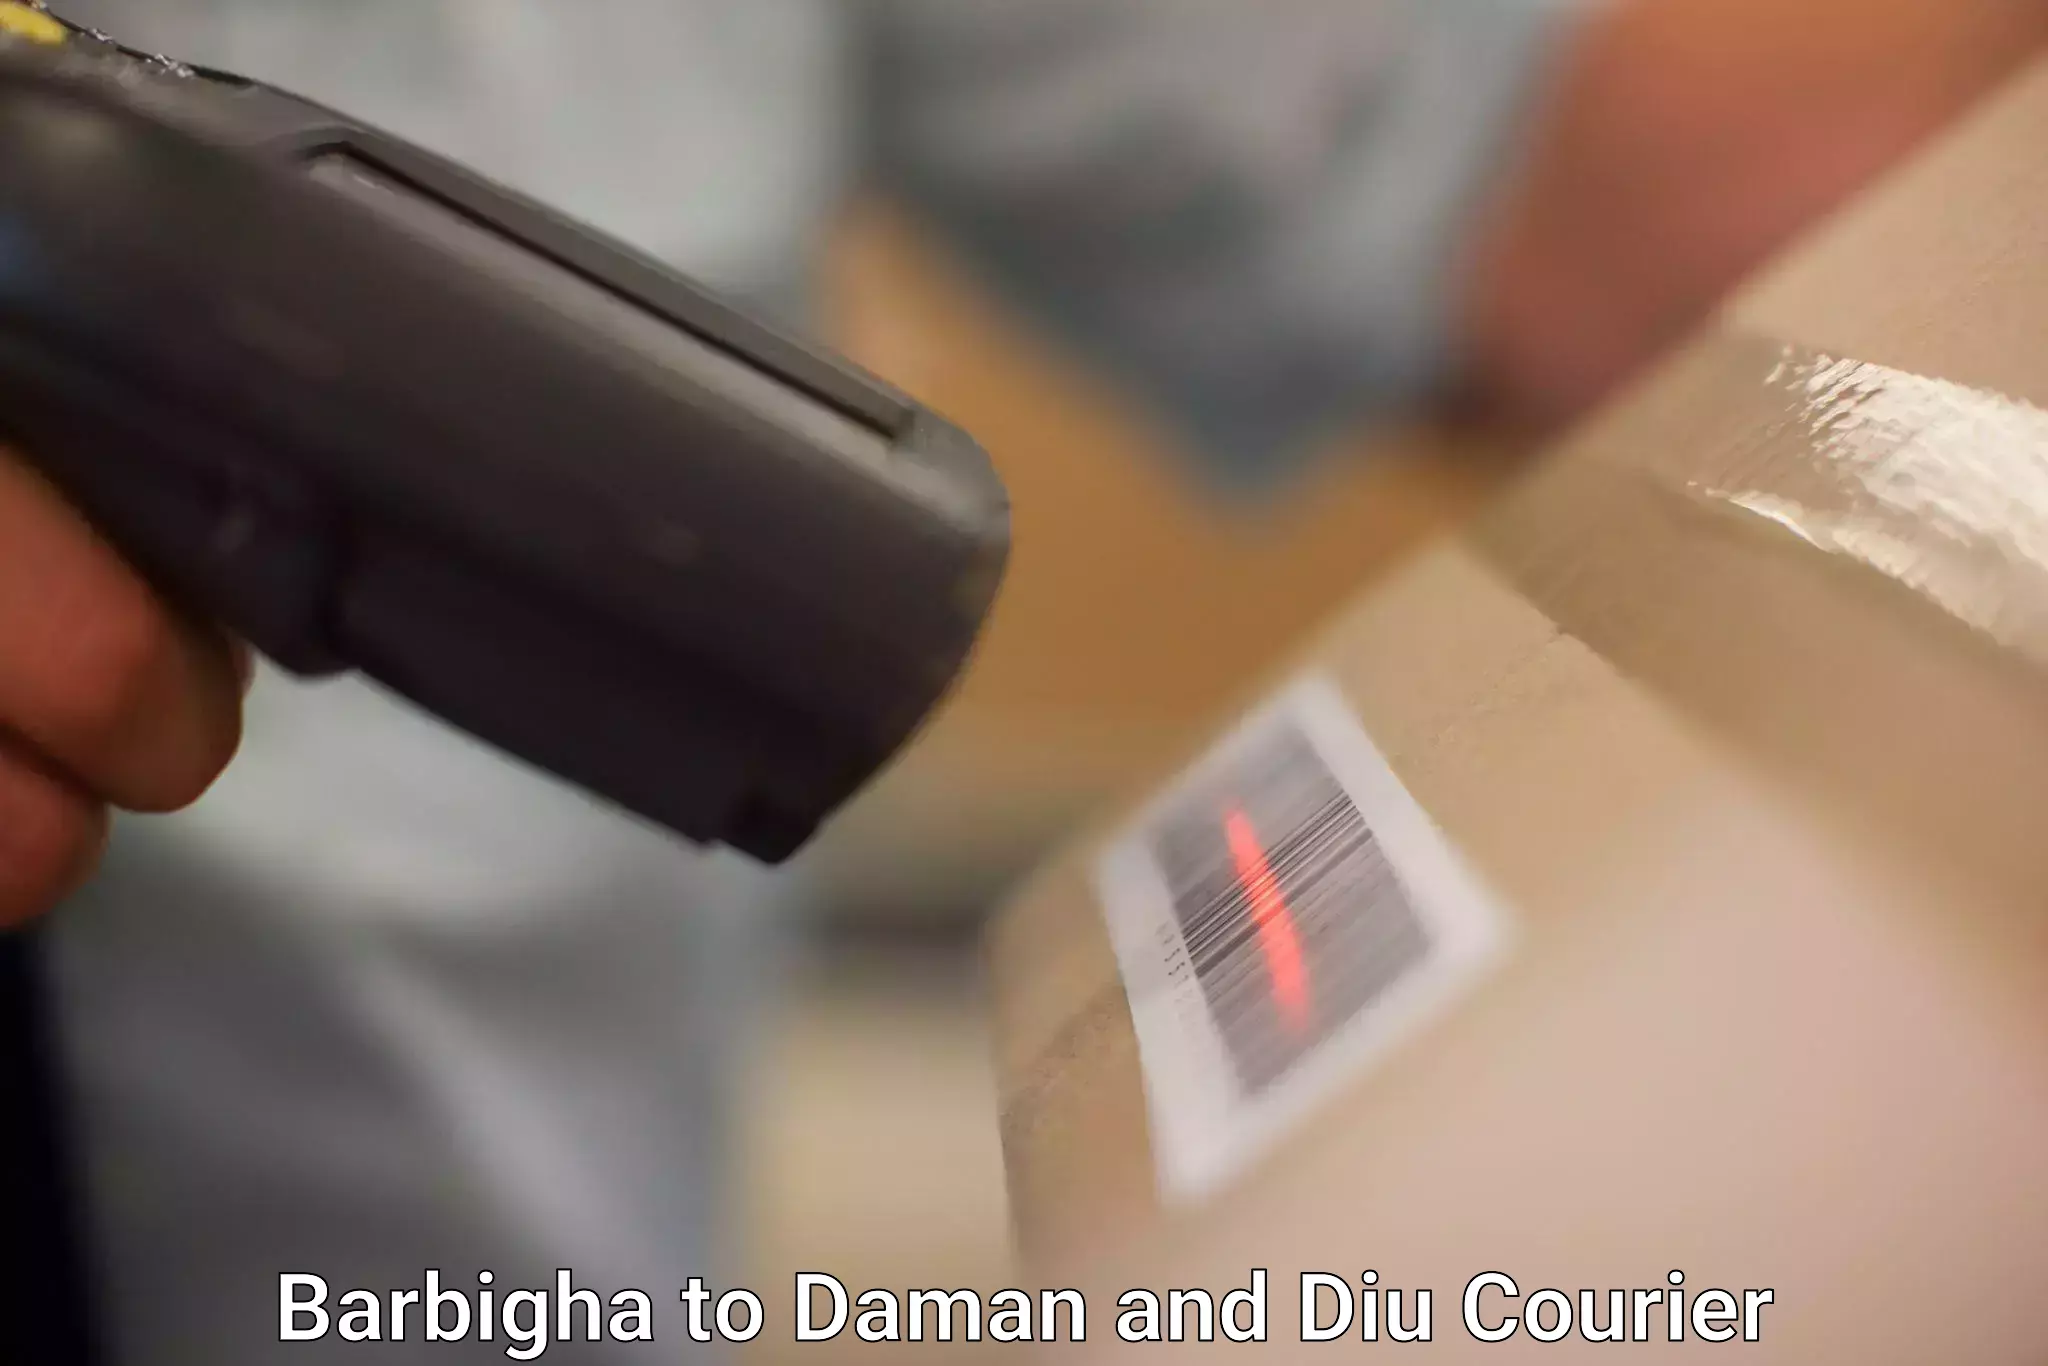 Affordable parcel service in Barbigha to Diu